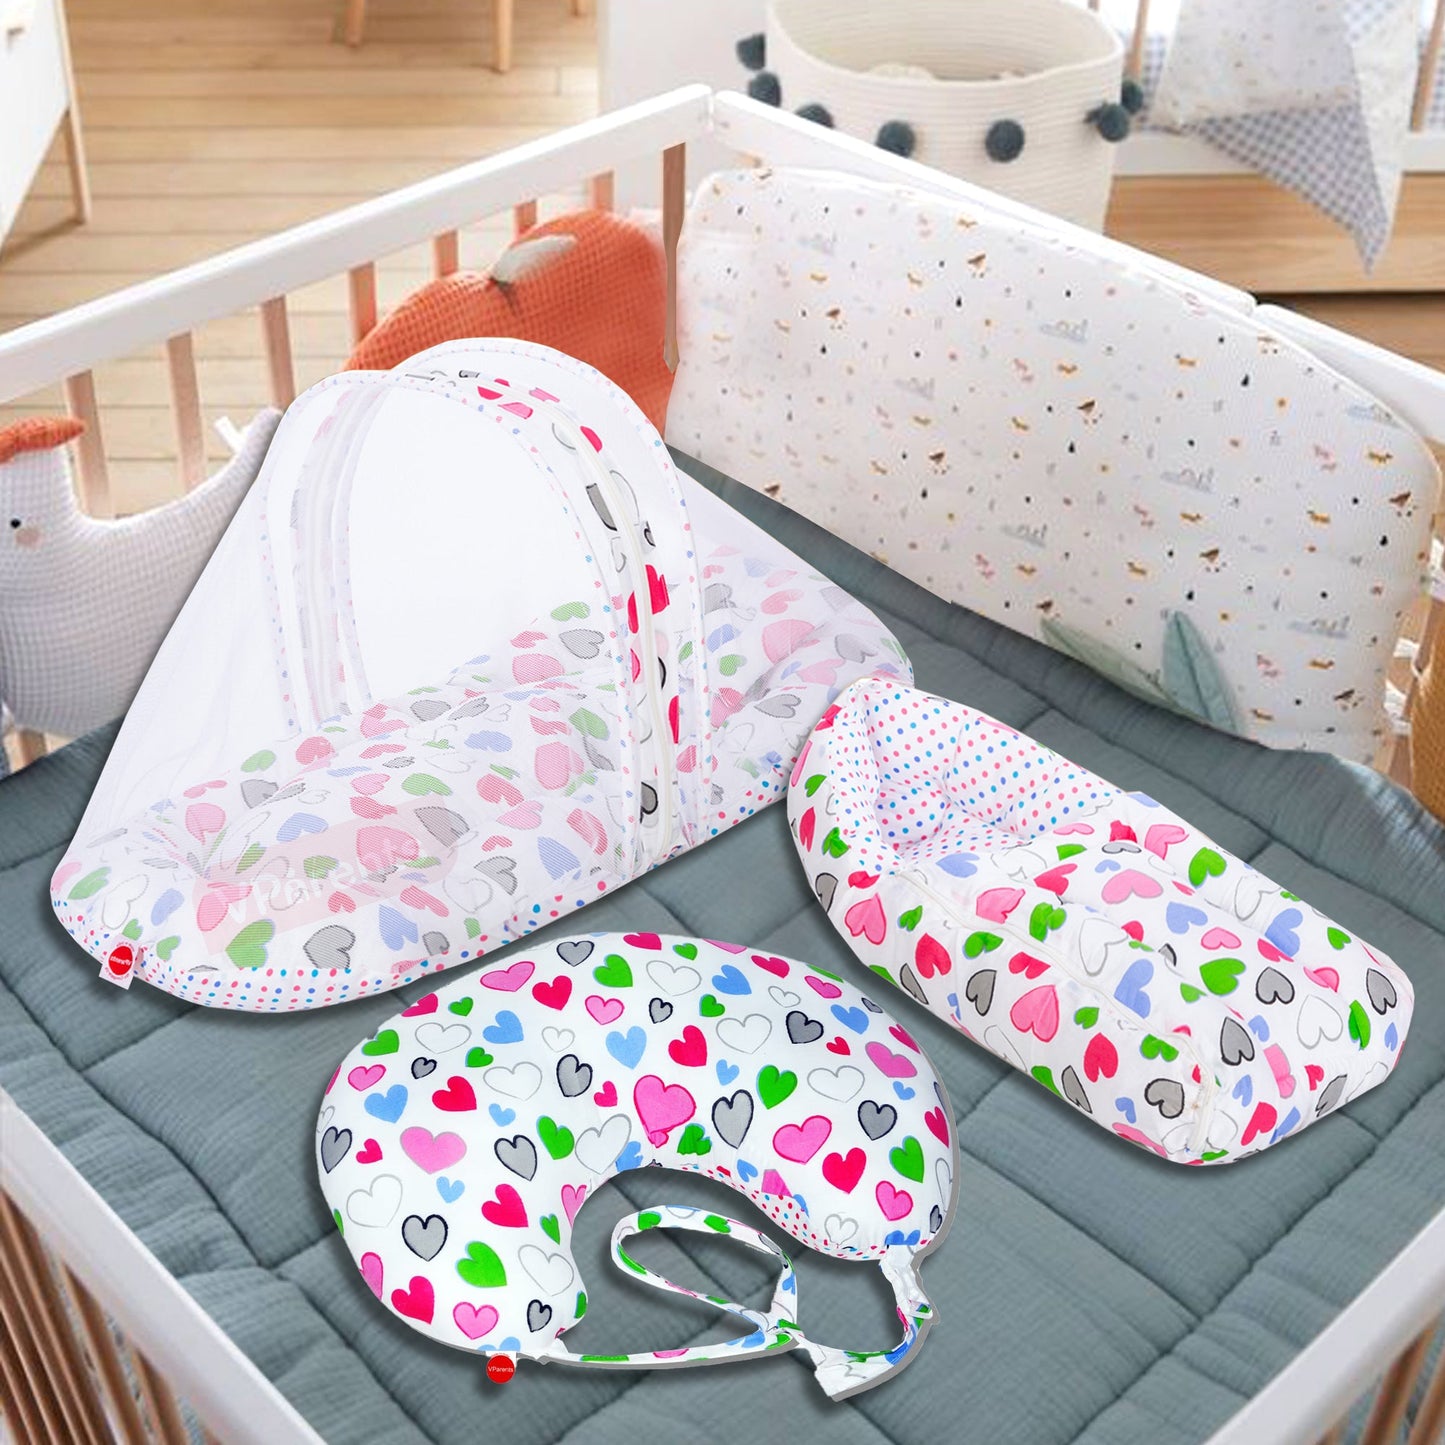 VParents daisy  Baby Feeding Pillow Bedding Set with Mosquito net and Sleeping Bag Combo Cotton, 0-6 Months, 3 Pcs